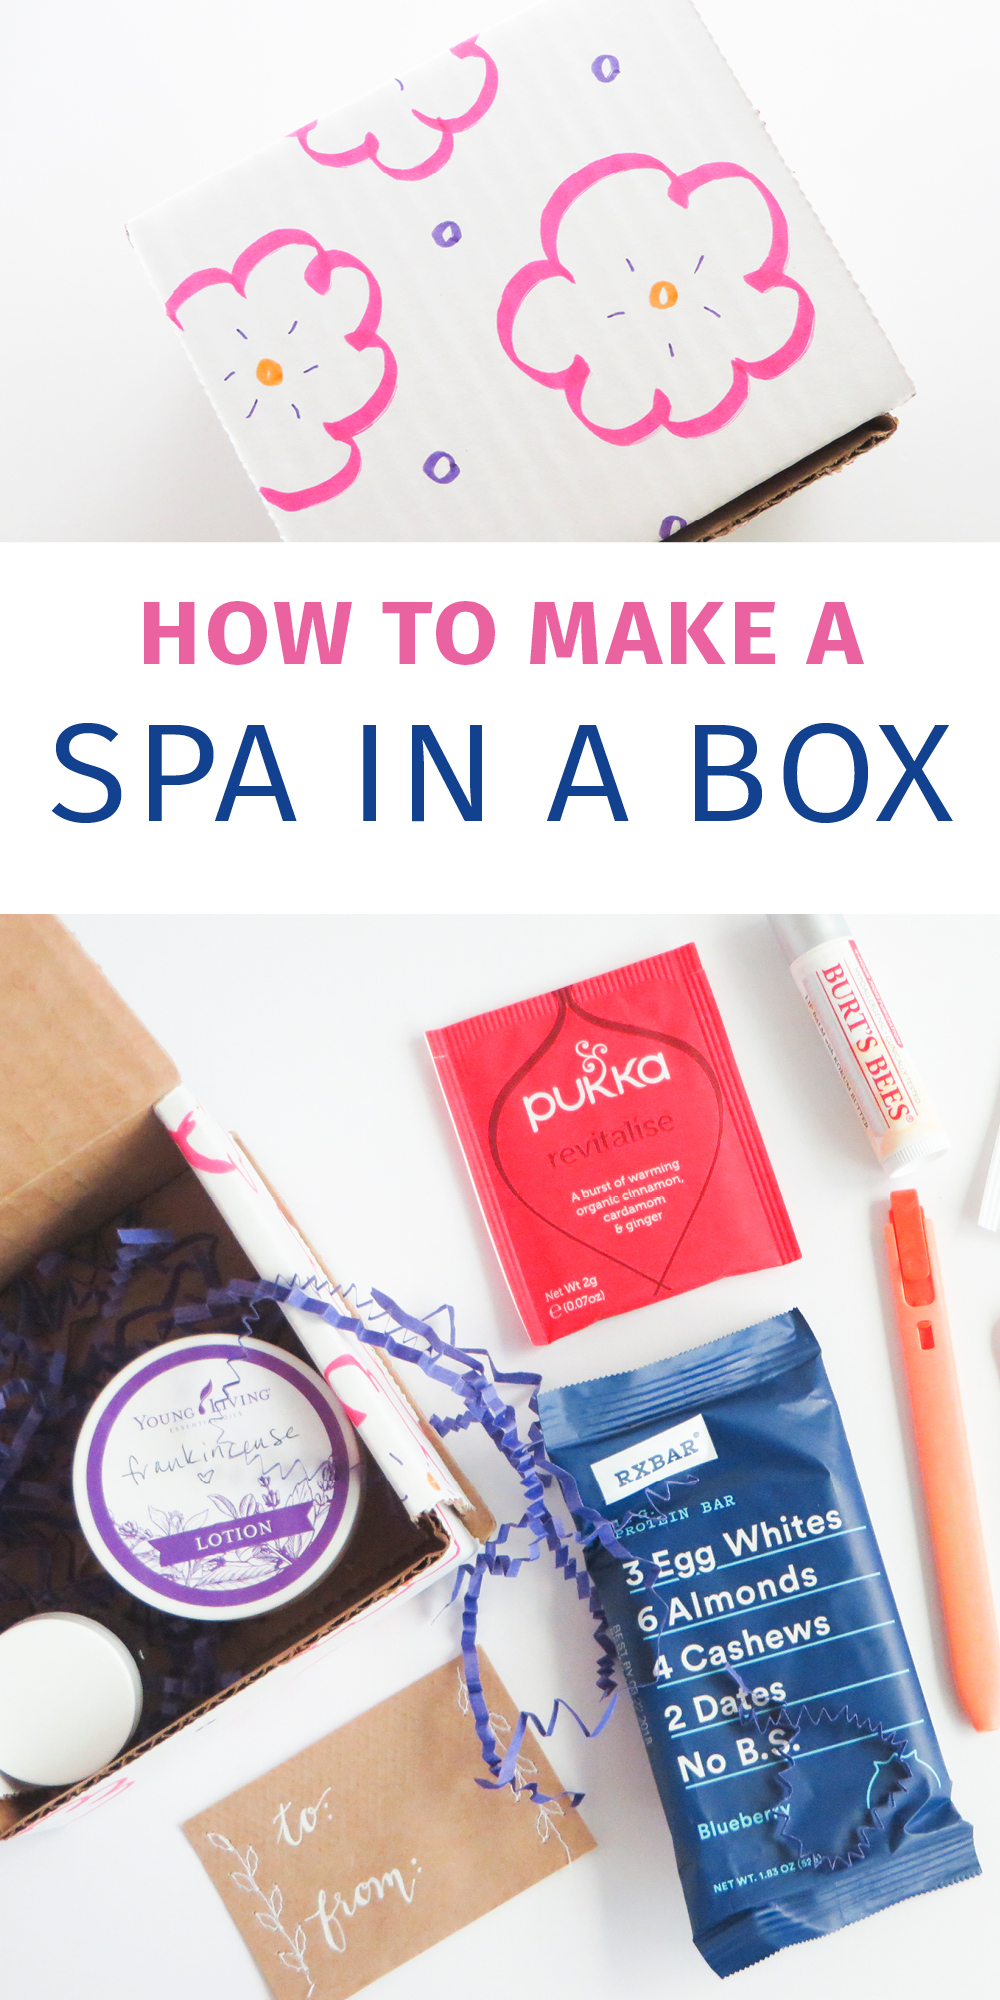 I love this idea! How to make a DIY spa in a box gift for a friend. So cute! I'd add my homemade sugar scrub and bath bomb; I know my friend will love this!